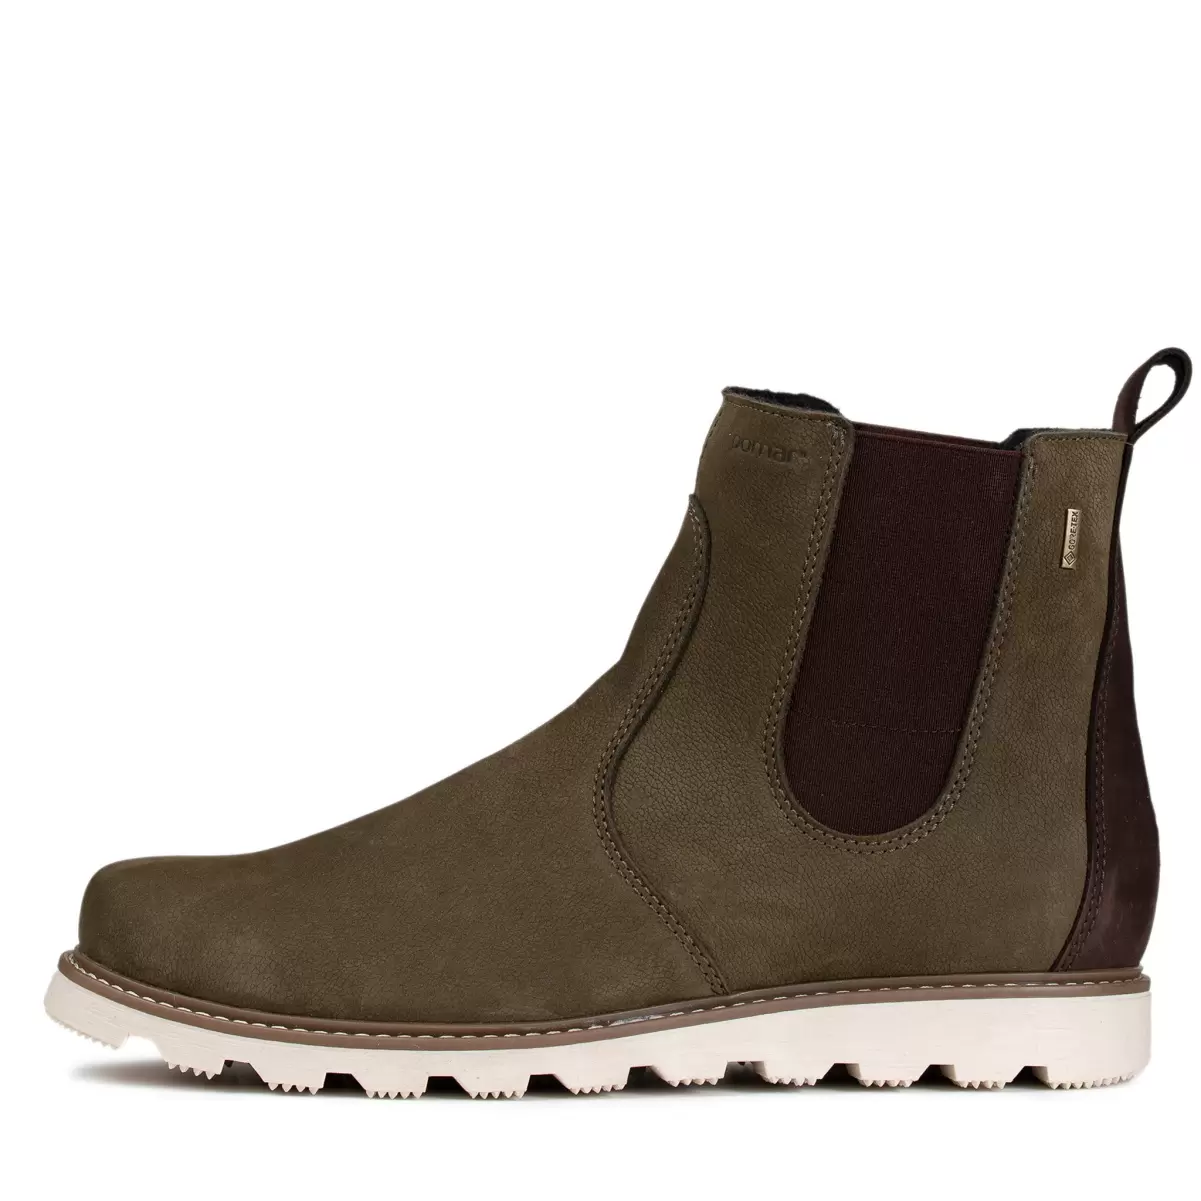 Raja Men's Gore-Tex® Chelsea Boots Pomarfin Oy Ankle Boots Men Olive Green Nubuck/Wht.sole